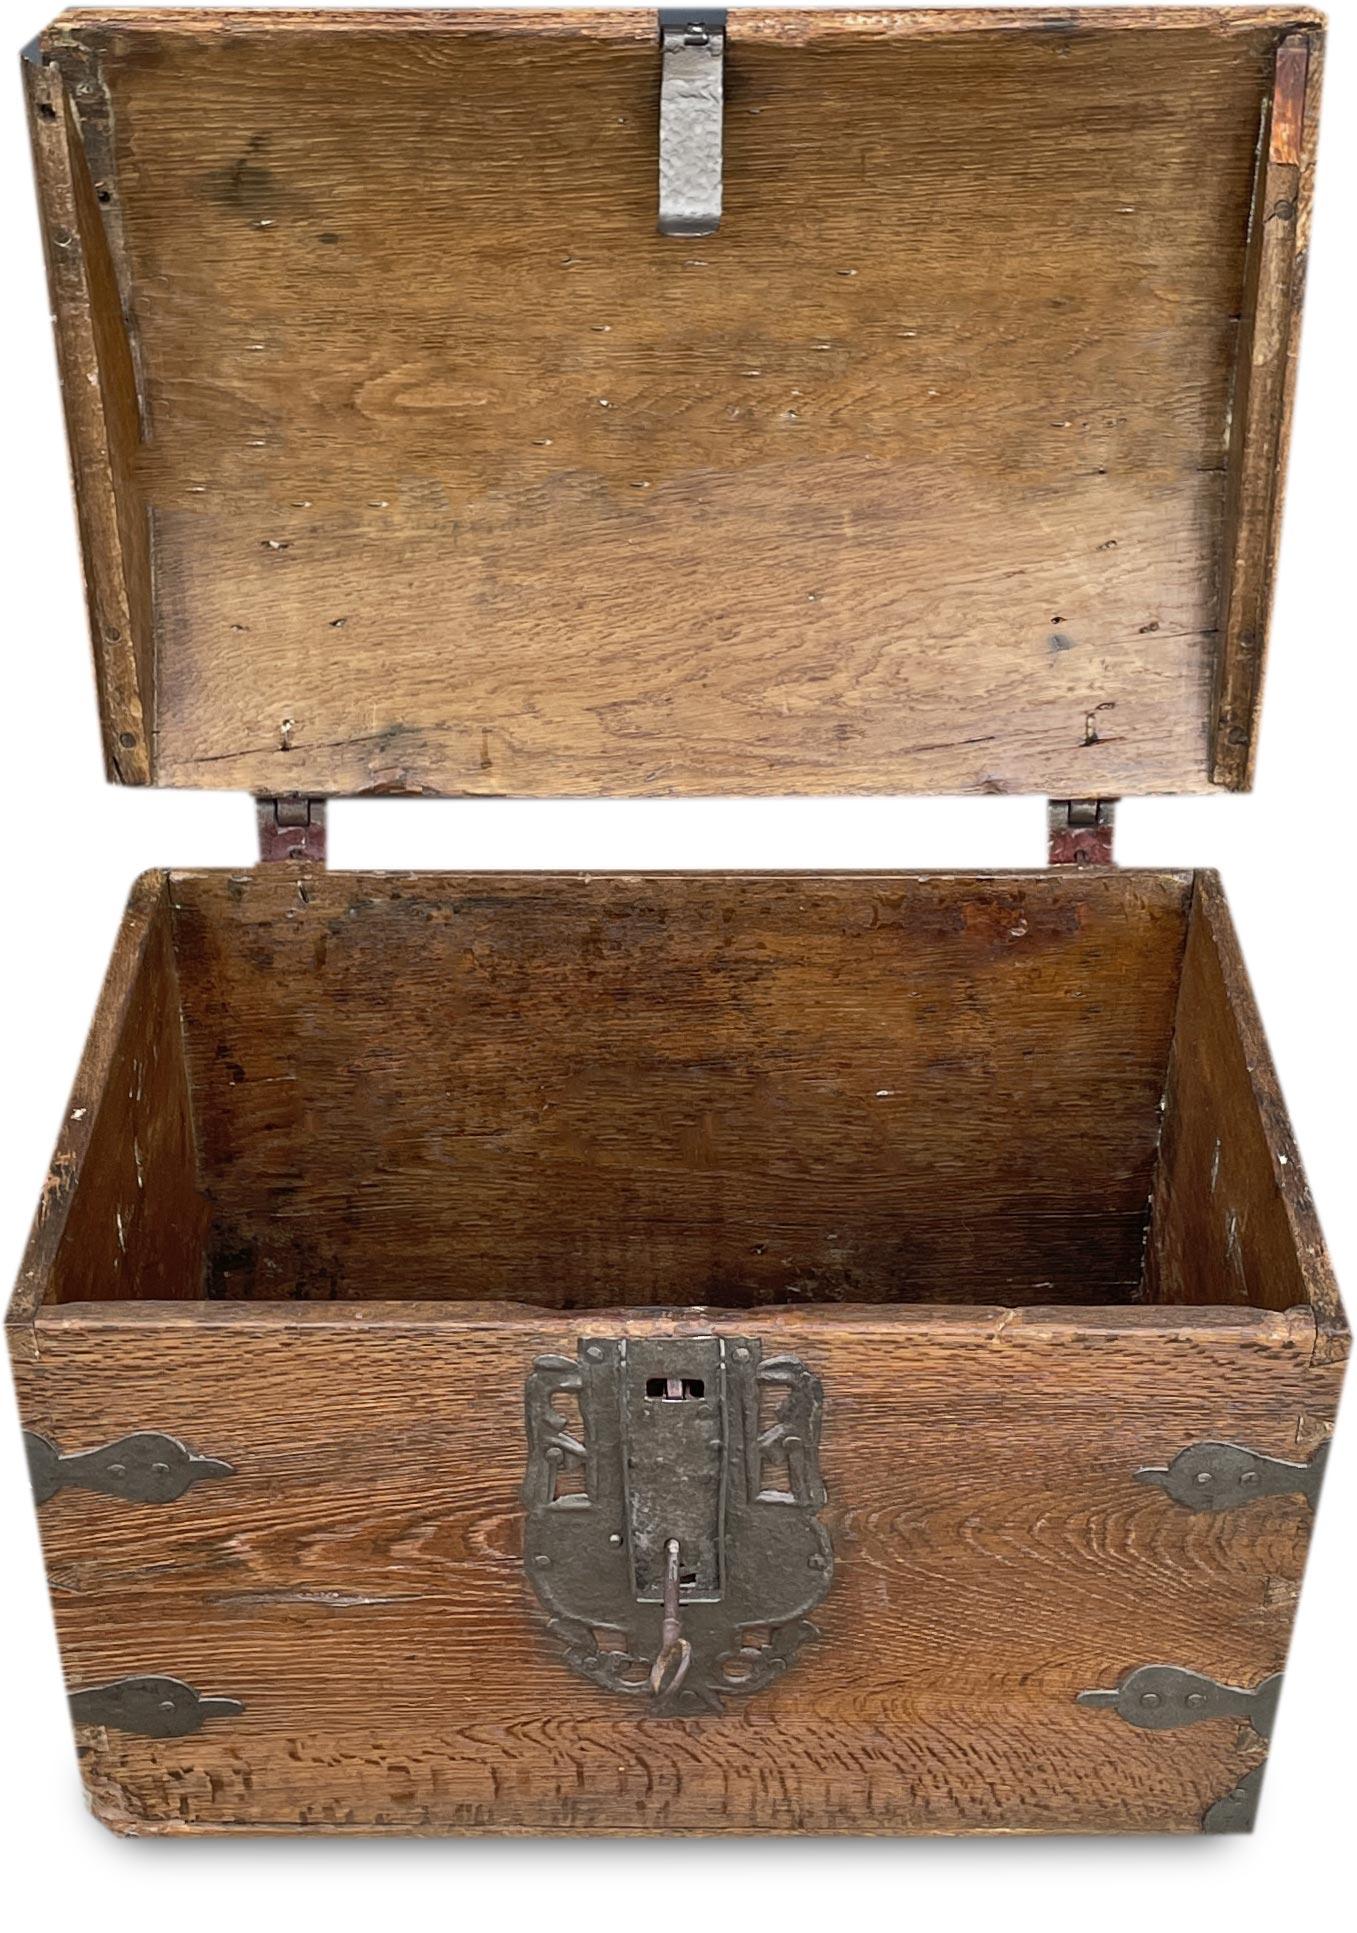 18th Century Oak Chest with Wrought Iron In Good Condition For Sale In Albignasego, IT